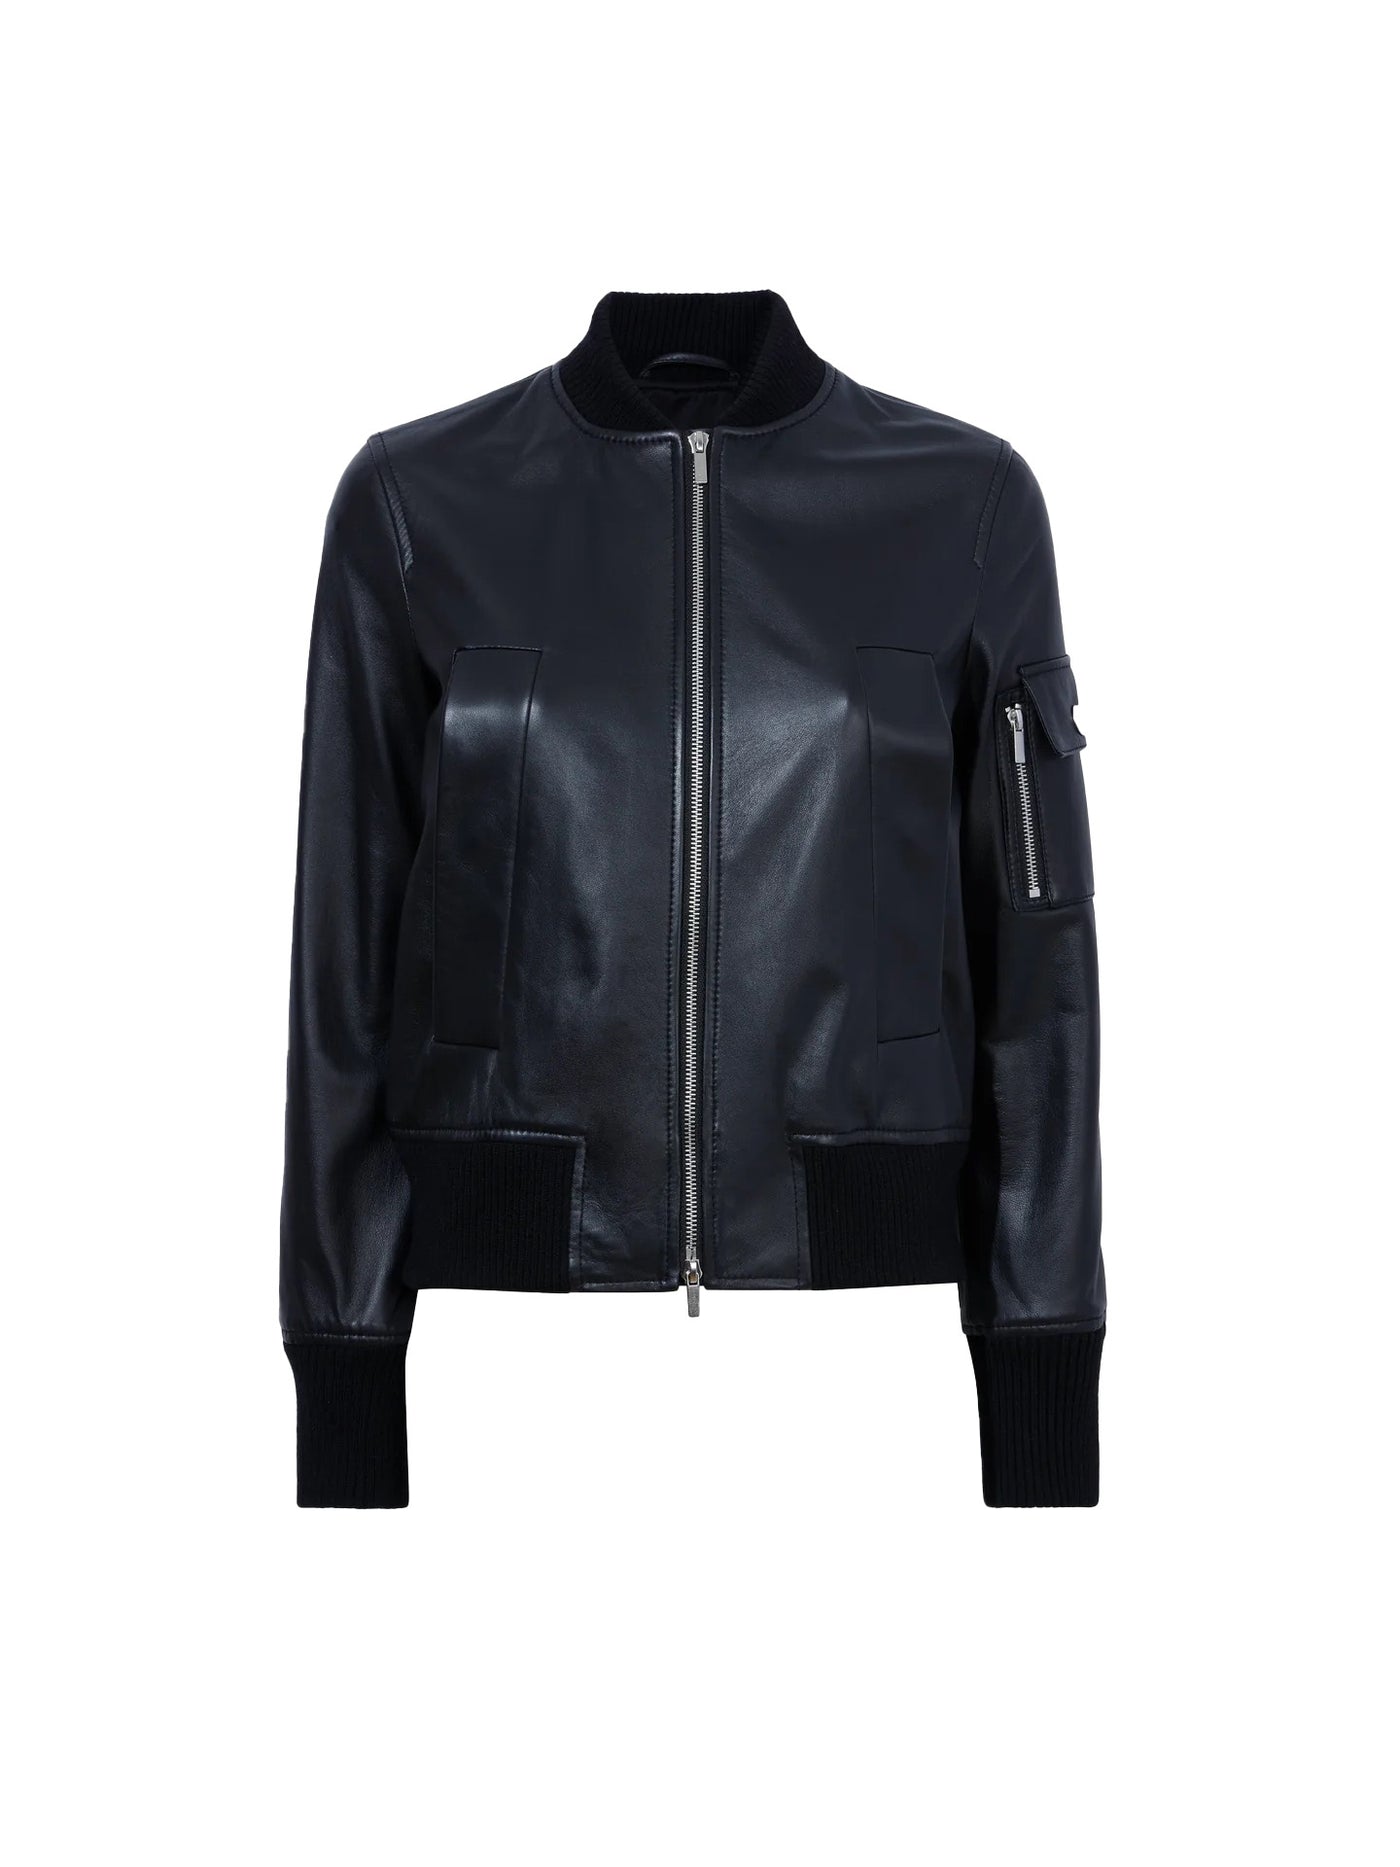 Mika Bomber Jacket in Lightweight Leather